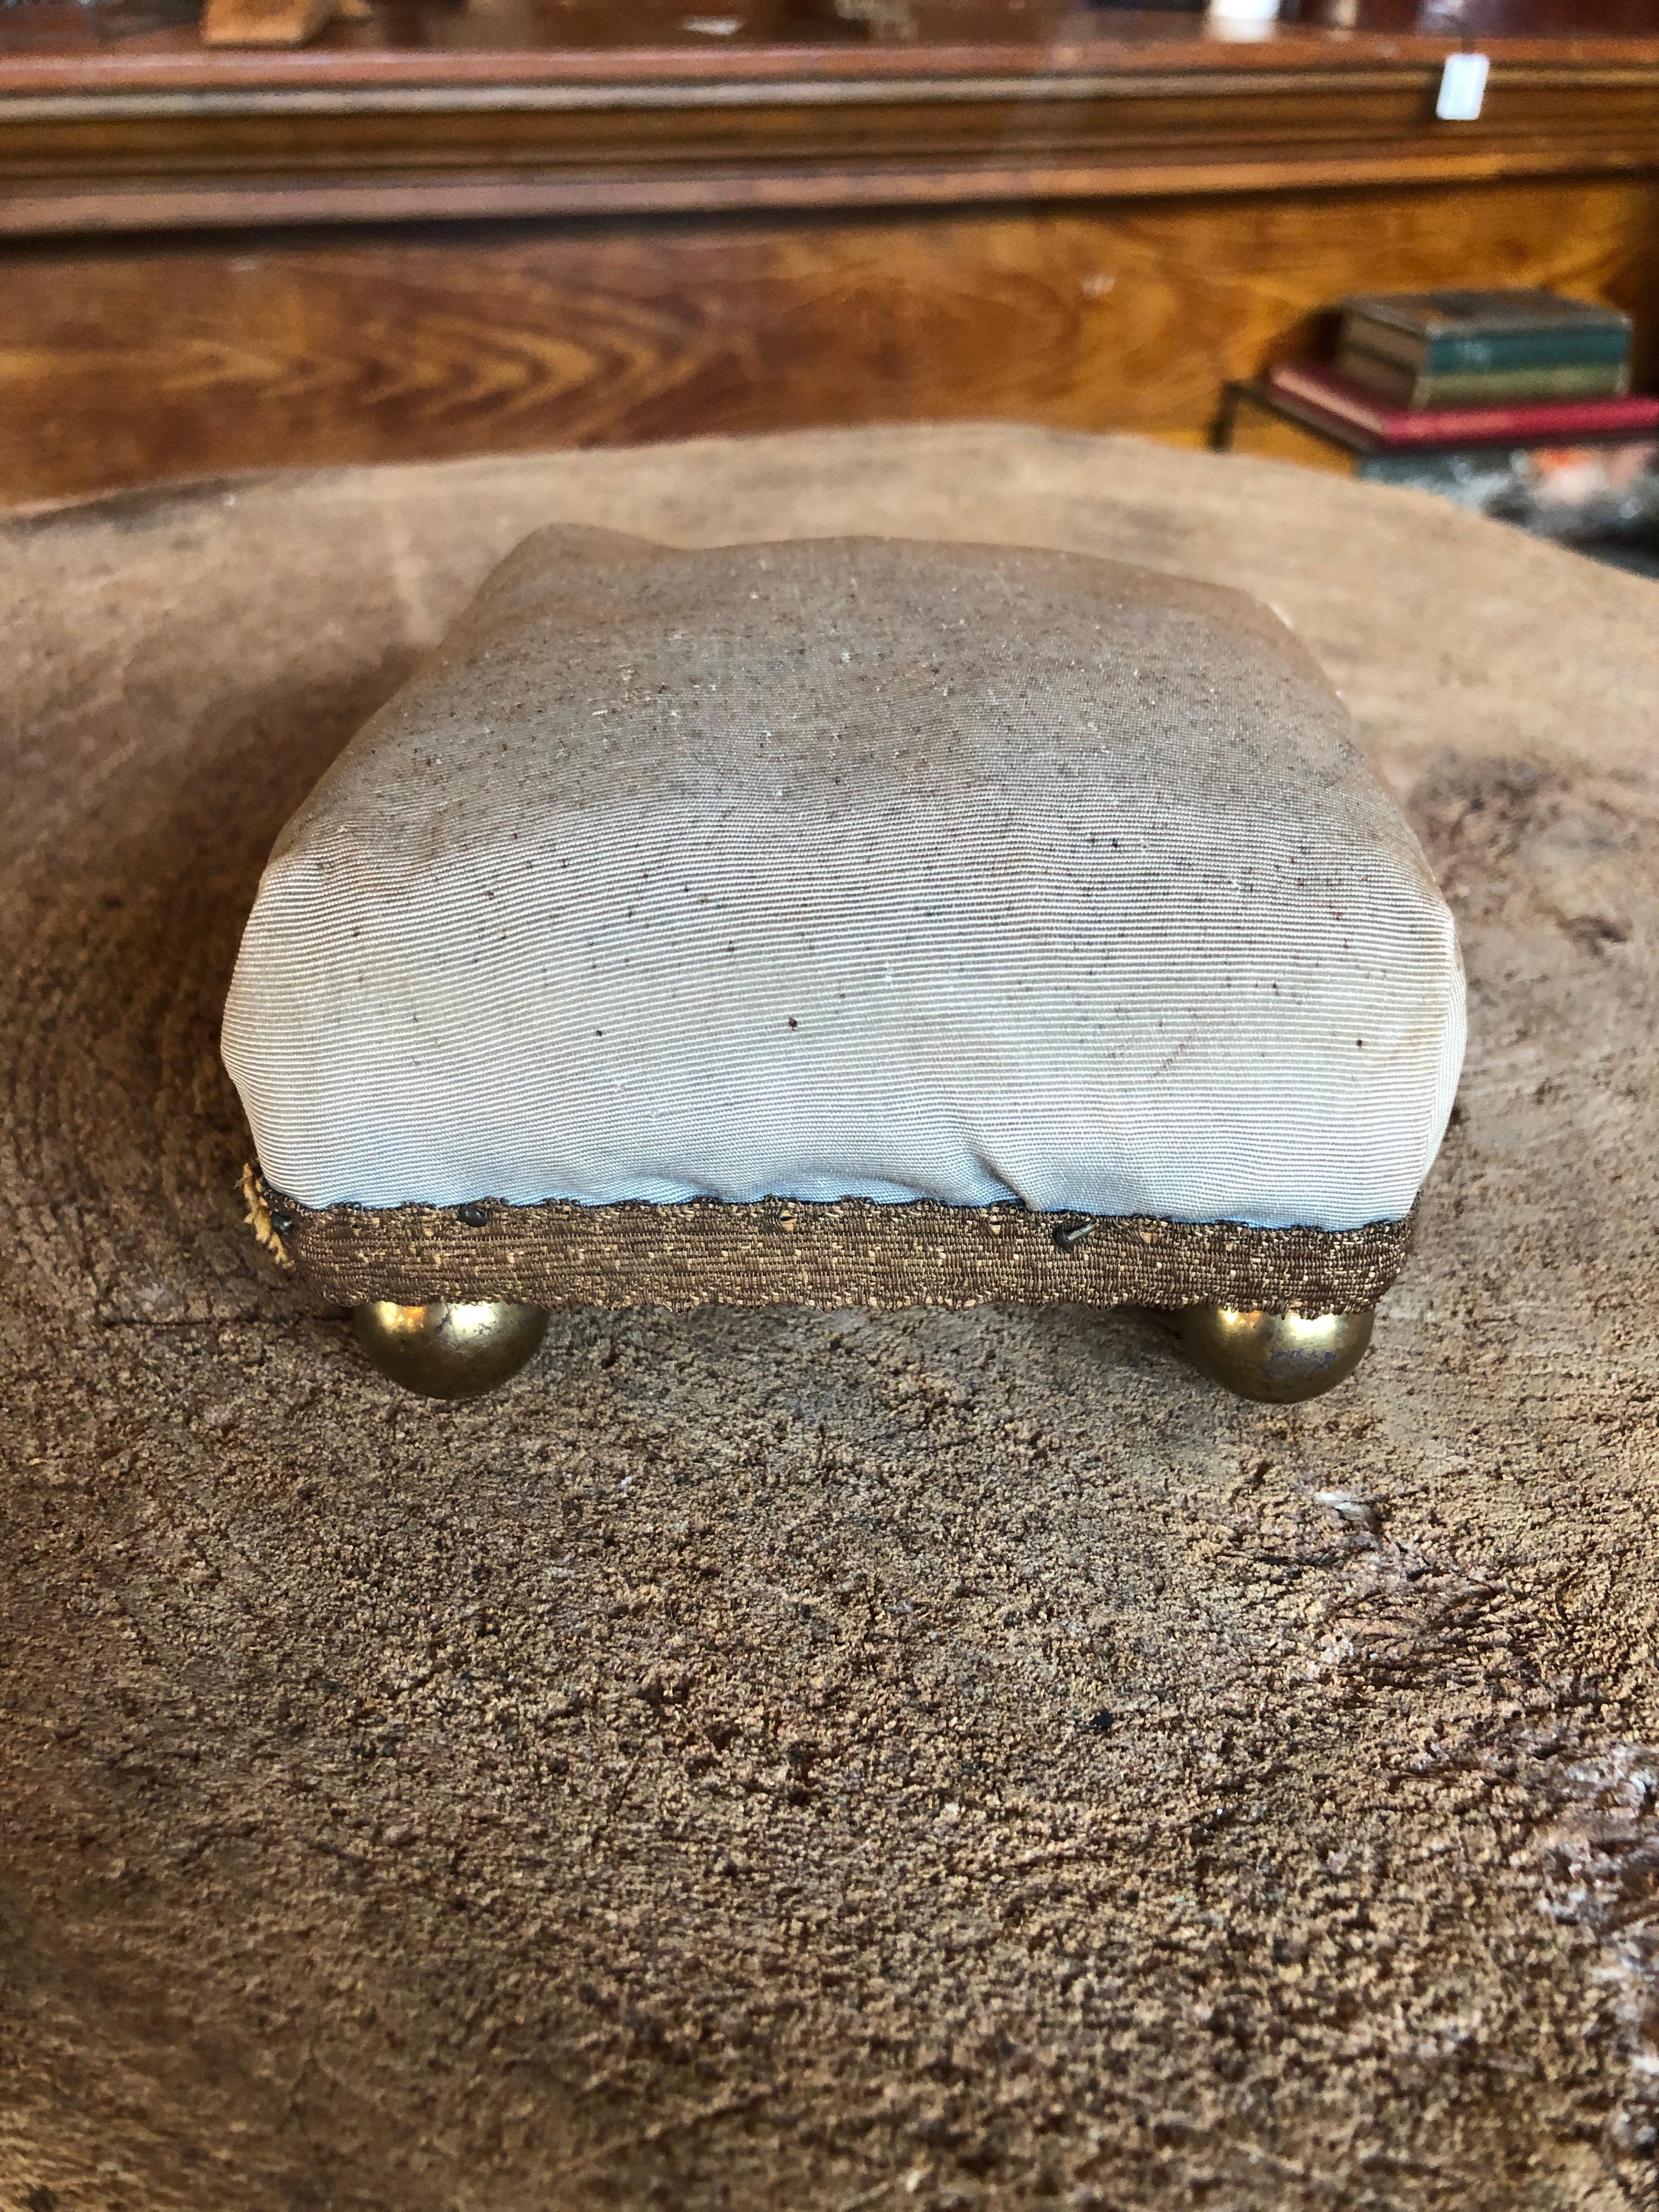 This is a fabulous early 20th century pin cushion with brass ball feet covered in original faded blue fabric. Great for displaying jewelry. Other pin cushions available as seen in photo.